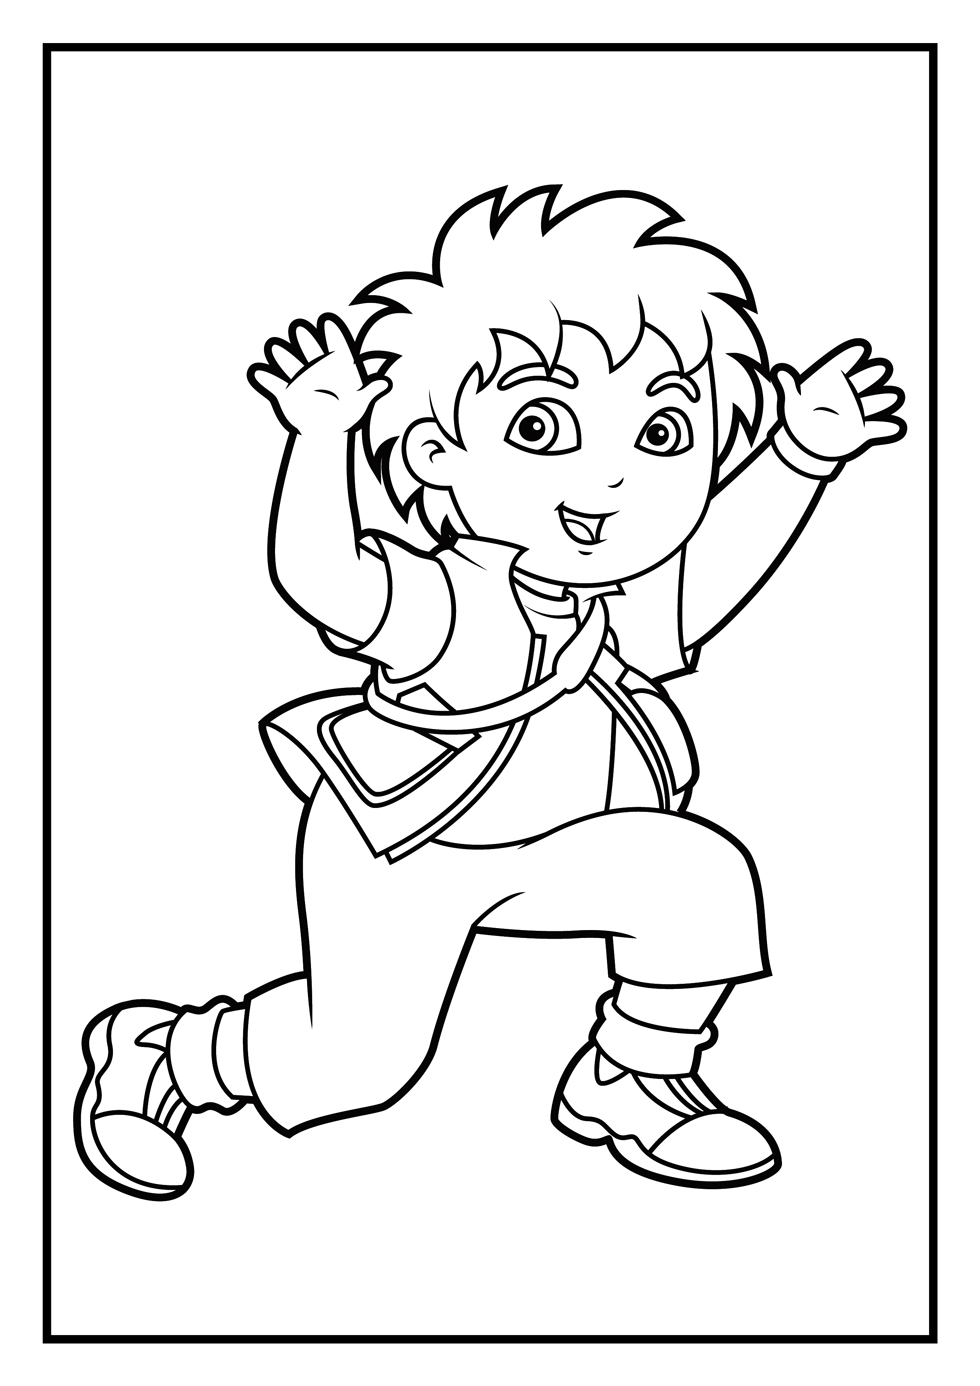 Printable Diego Coloring Pages - Printable Word Searches